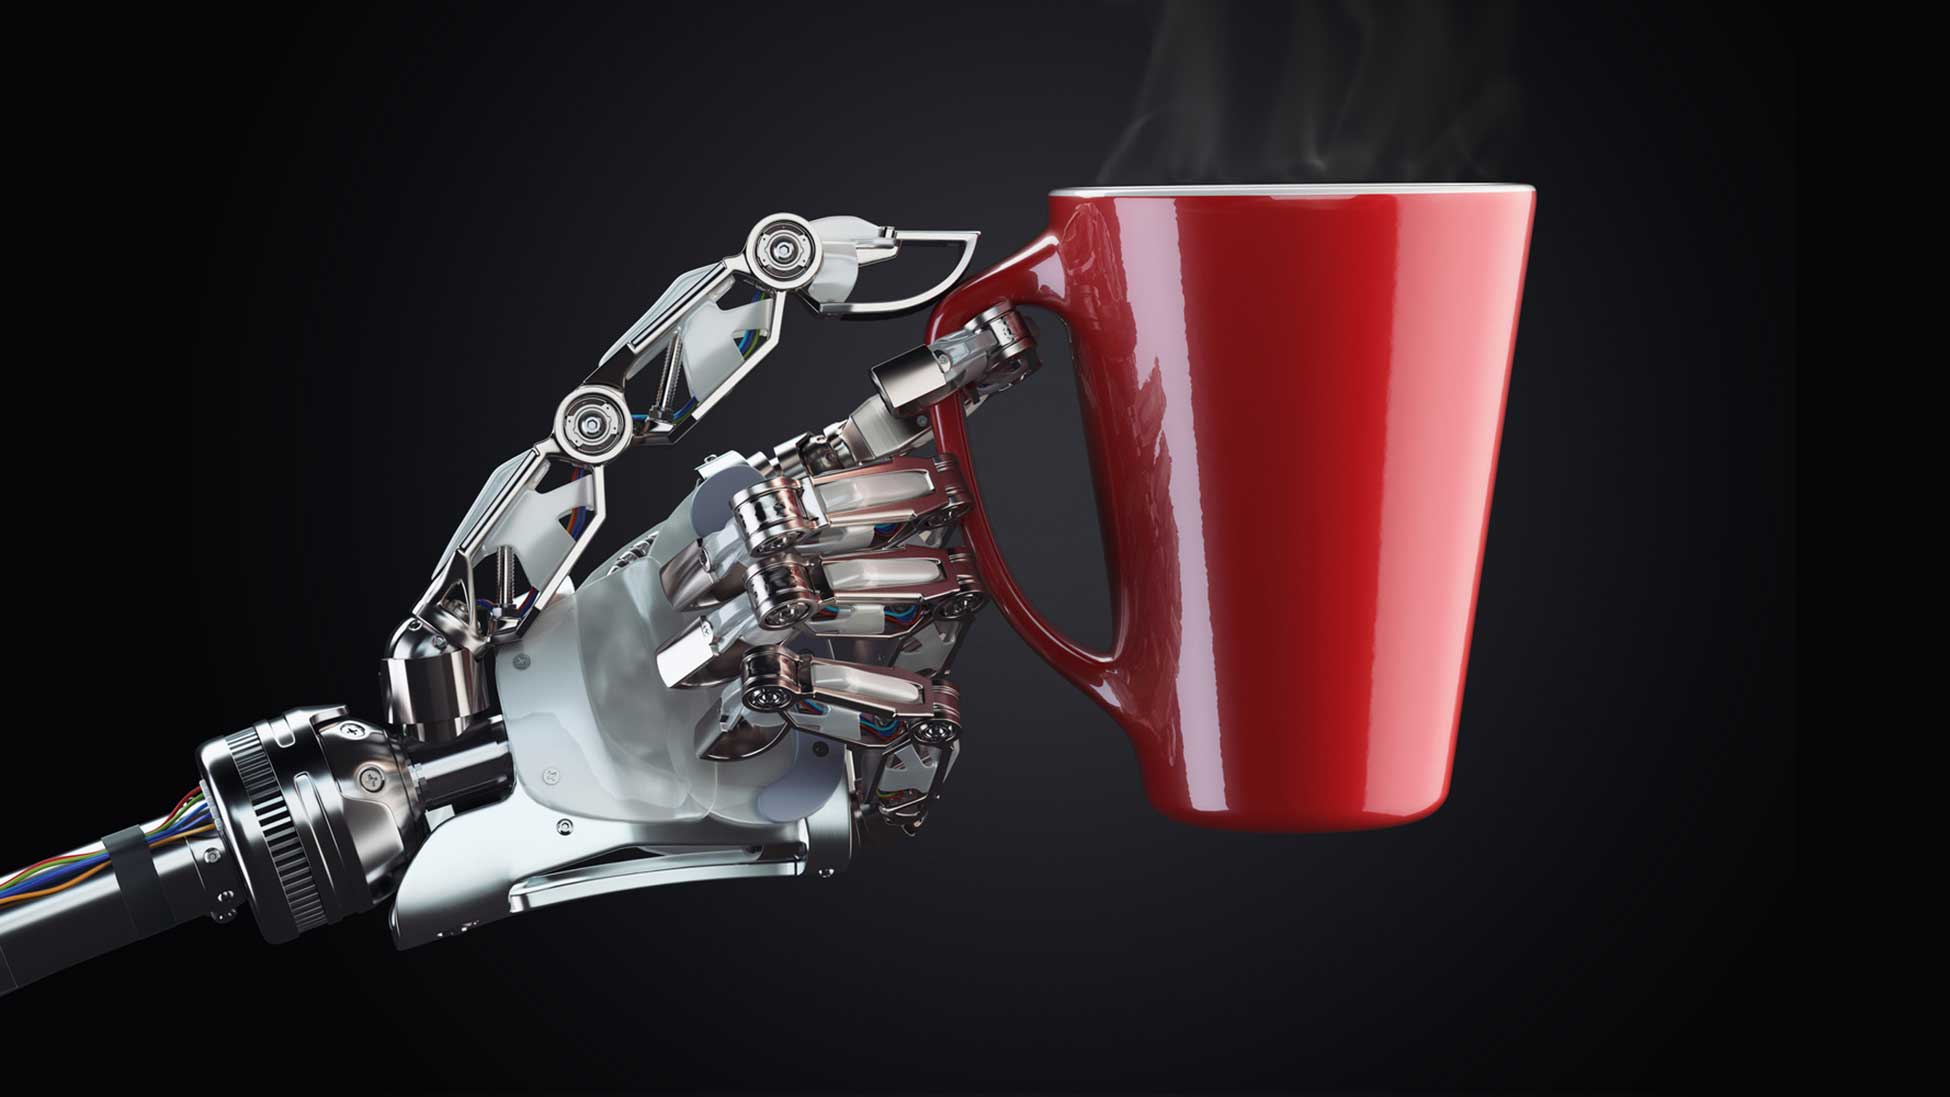 A robot hand is shown holding a red cup of steaming hot coffee